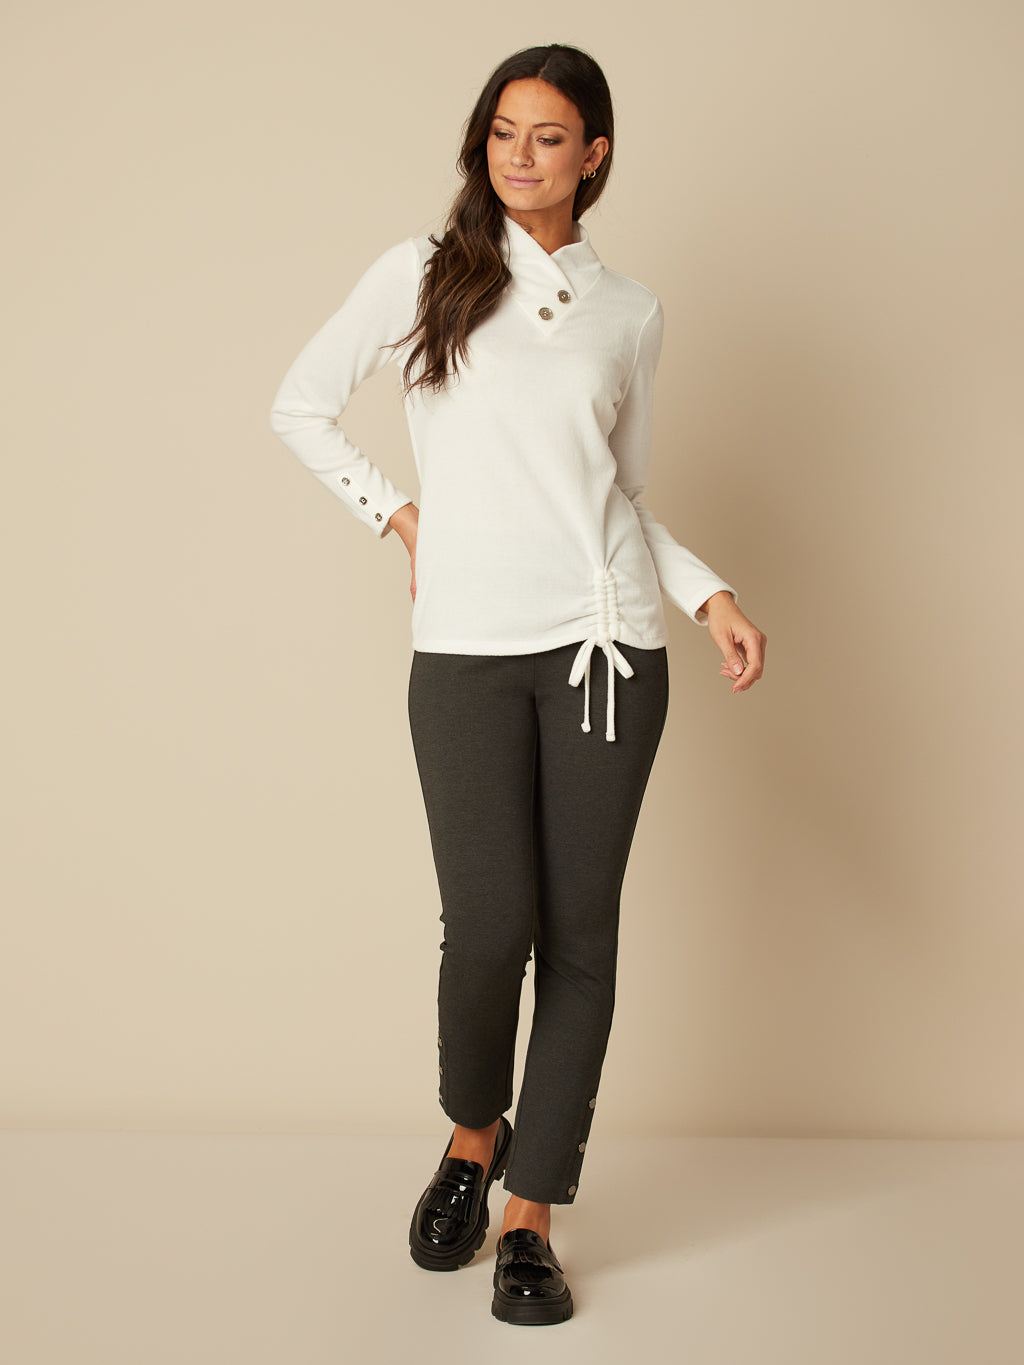 Long-sleeve semi-fitted knit tunic